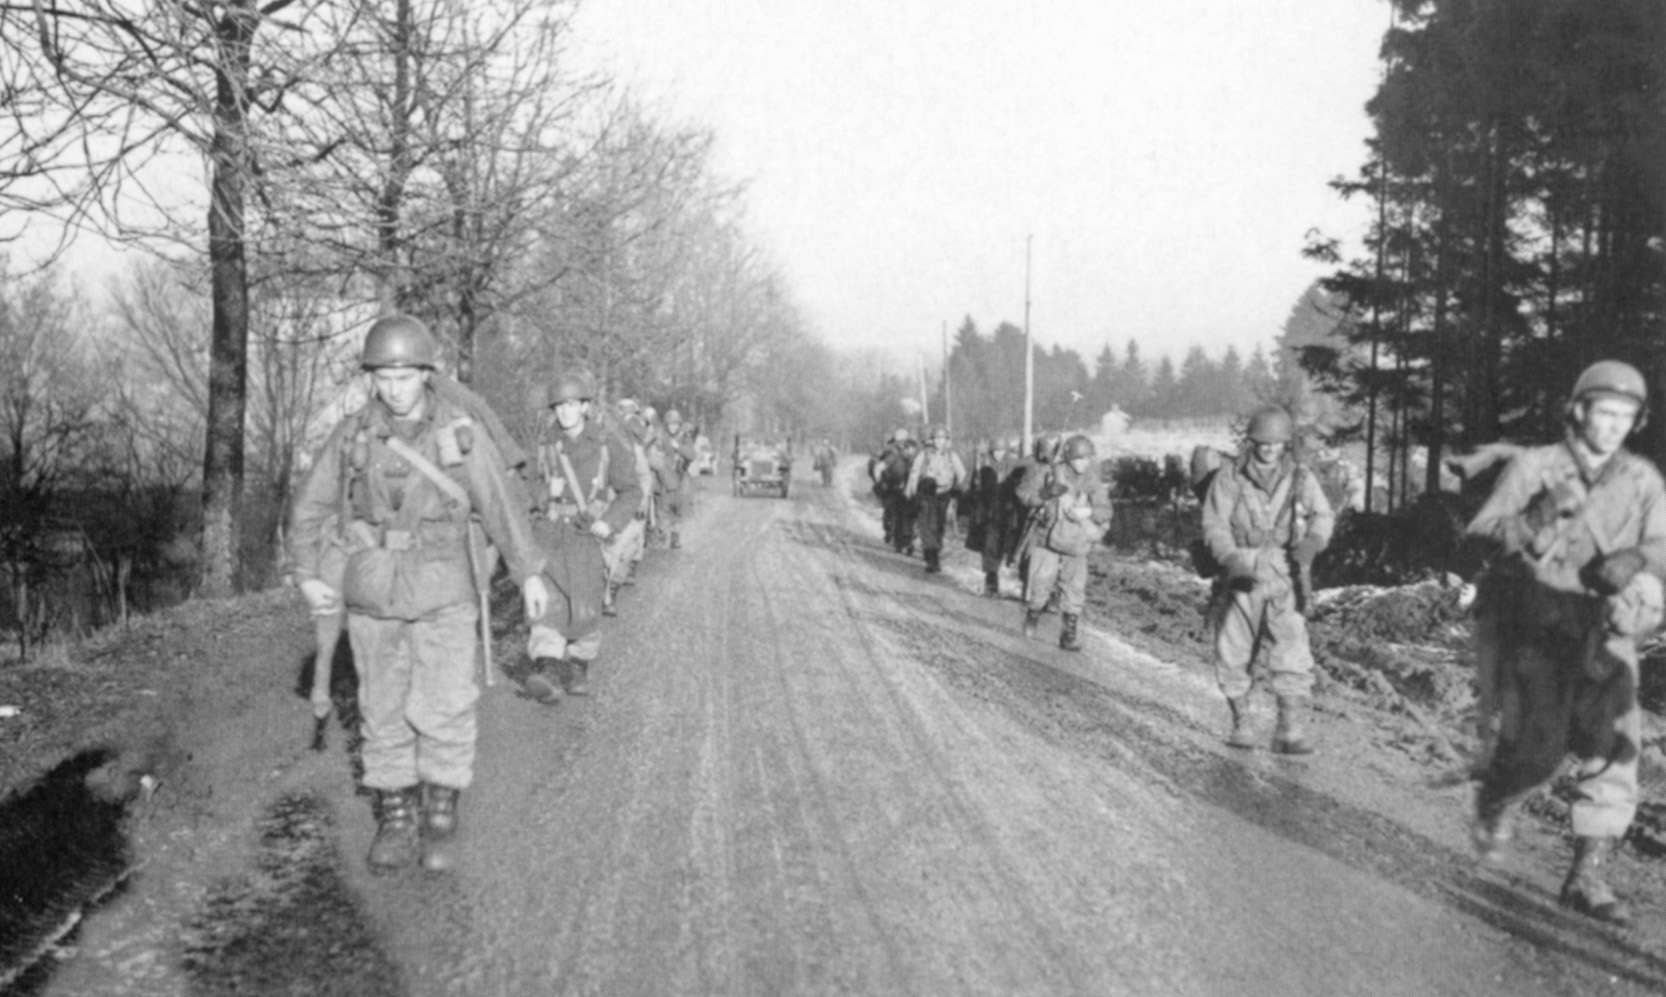 The only official Army photo ever to identify the 551st. It shows them moving up to the front lines very early in the Battle of the Bulge.